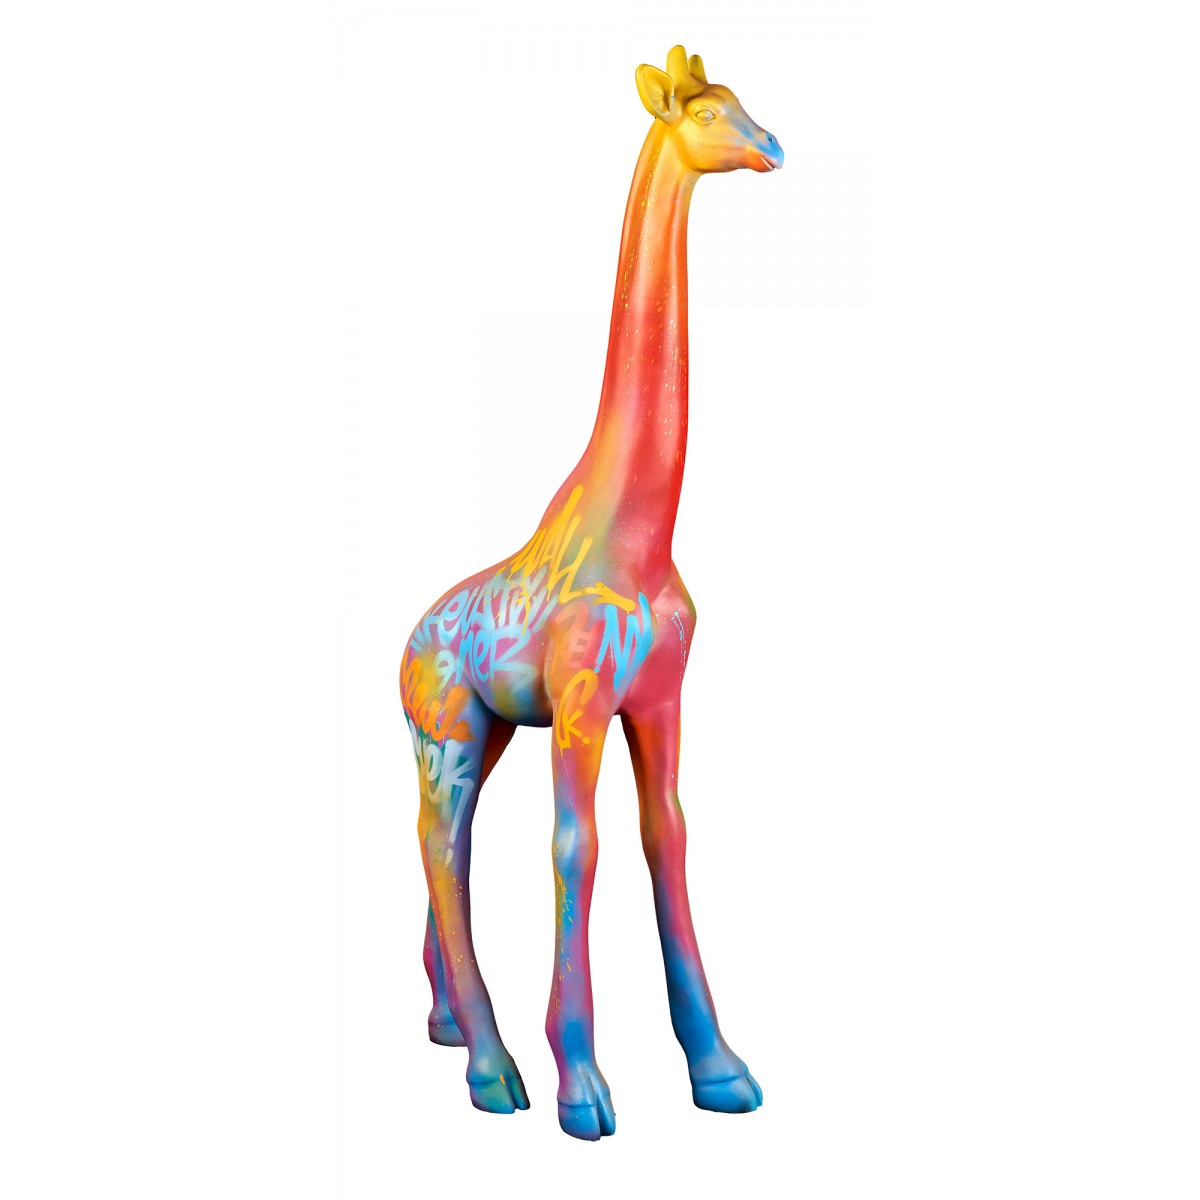 For your interior or exterior, statue opt in quality for this GIRAFFE